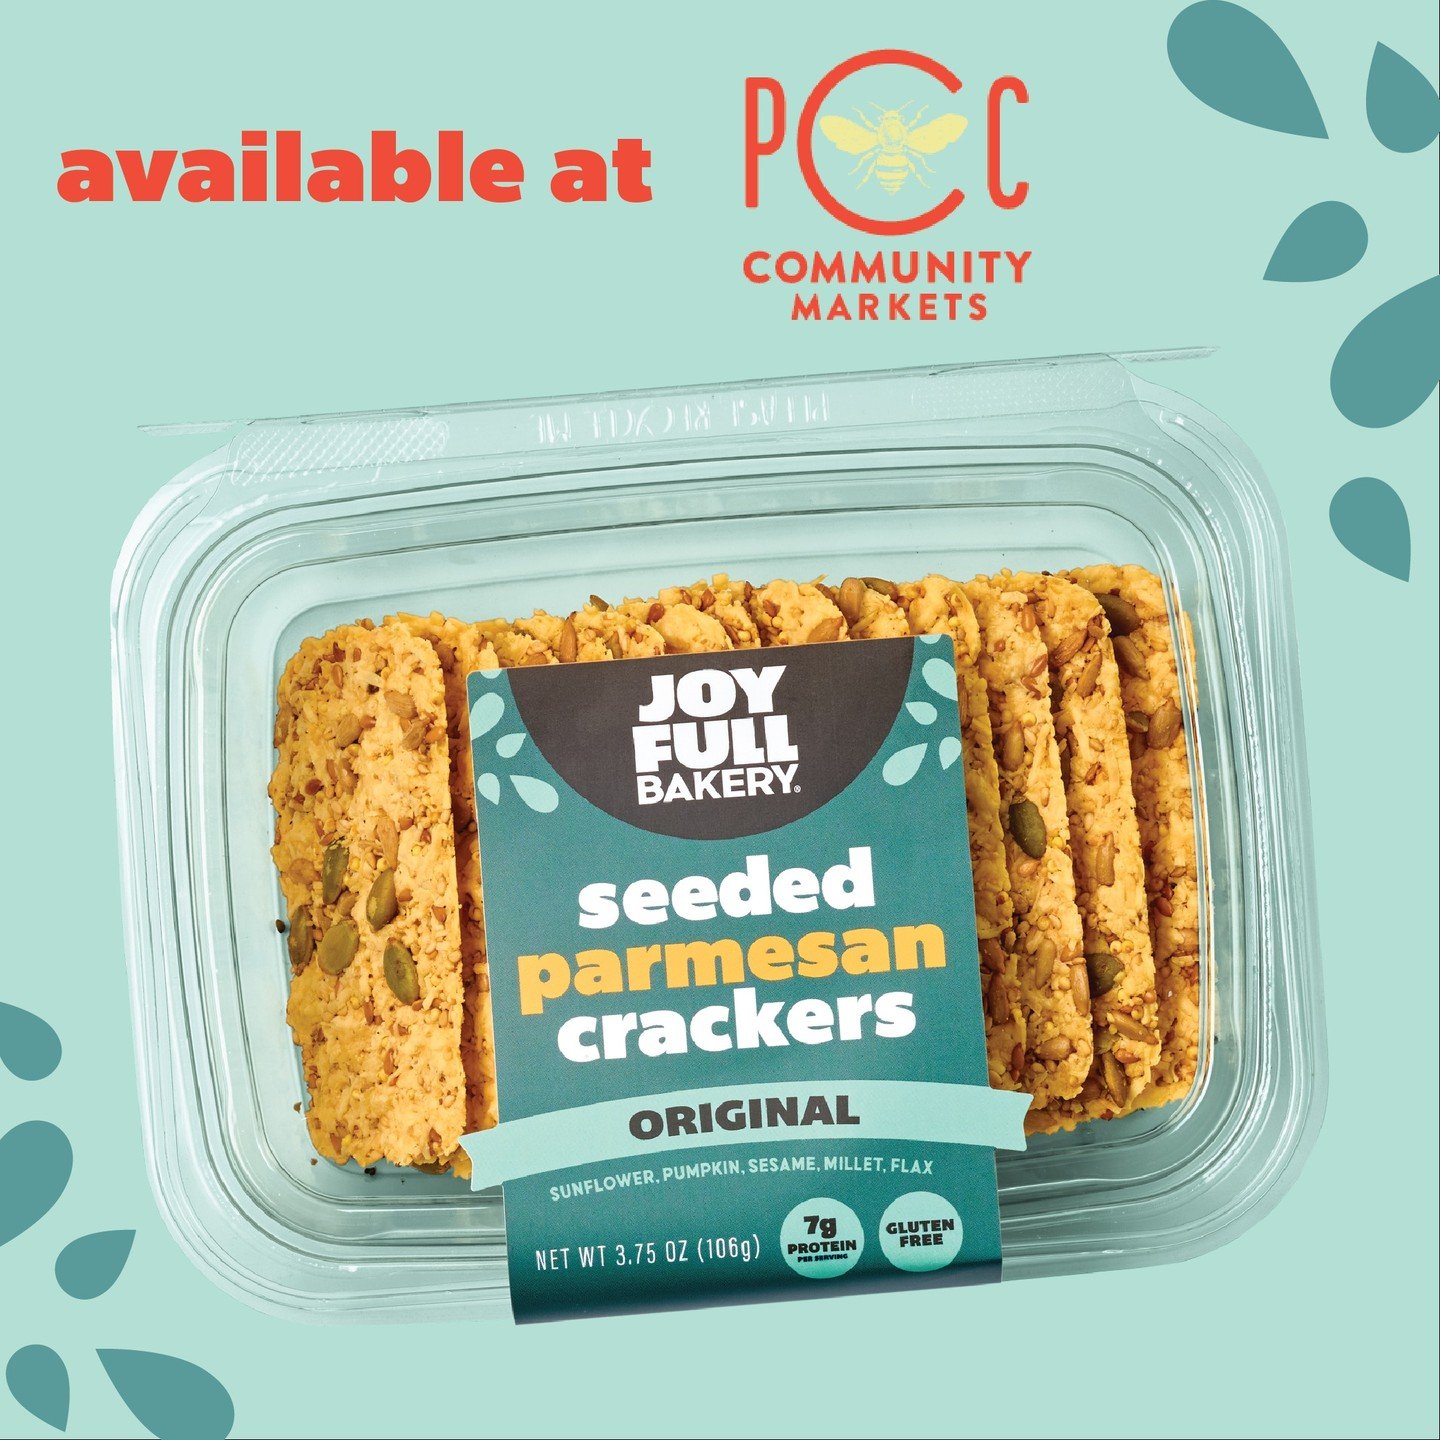 Joyfull news comin at ya! If you live in the Greater Seattle area, you can find our Original Seeded Parmesan Crackers at PCC Community Markets! 💛